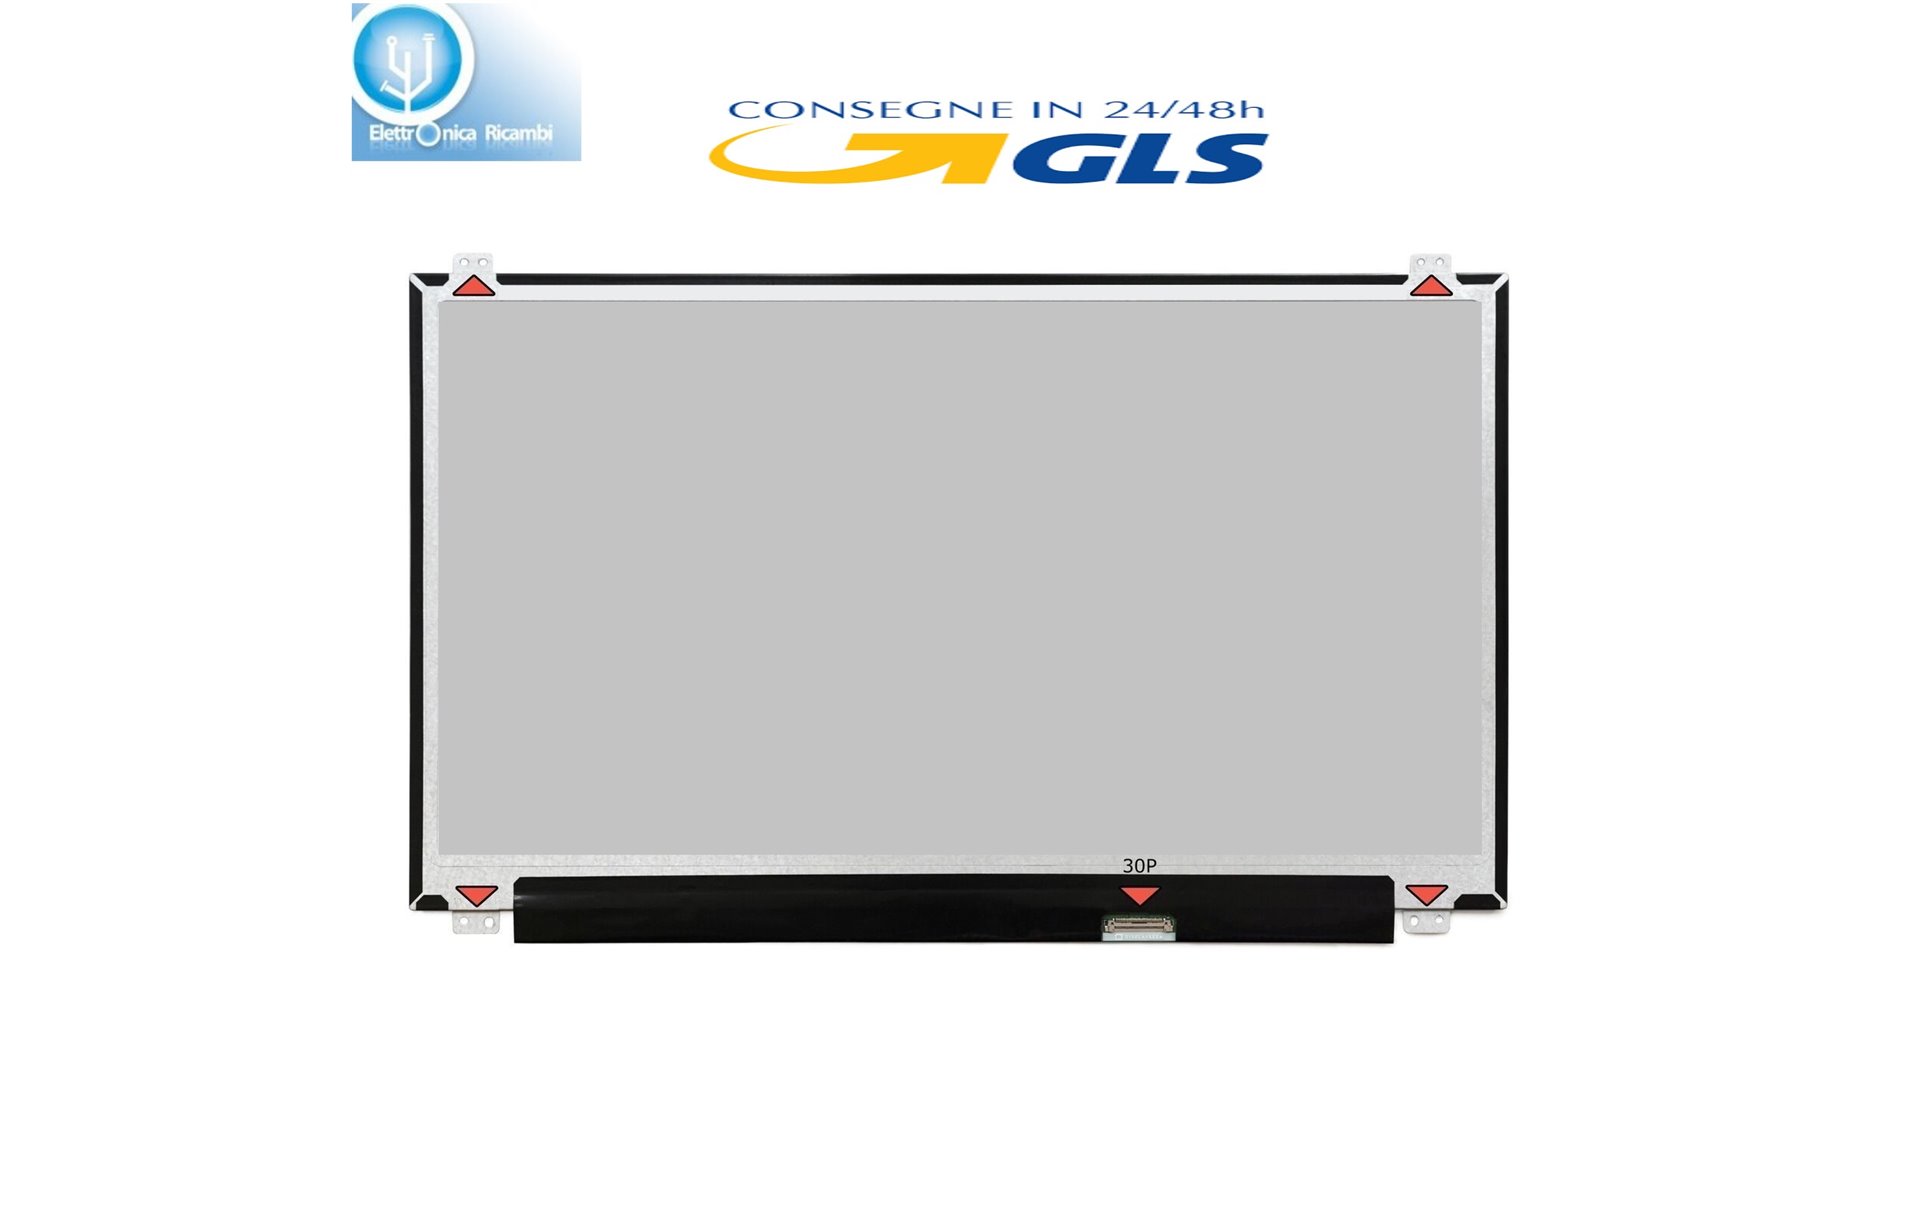 DISPLAY LCD ACER ASPIRE E1-532-29574G50Dnii 15.6 1366x768 LED 30 pin